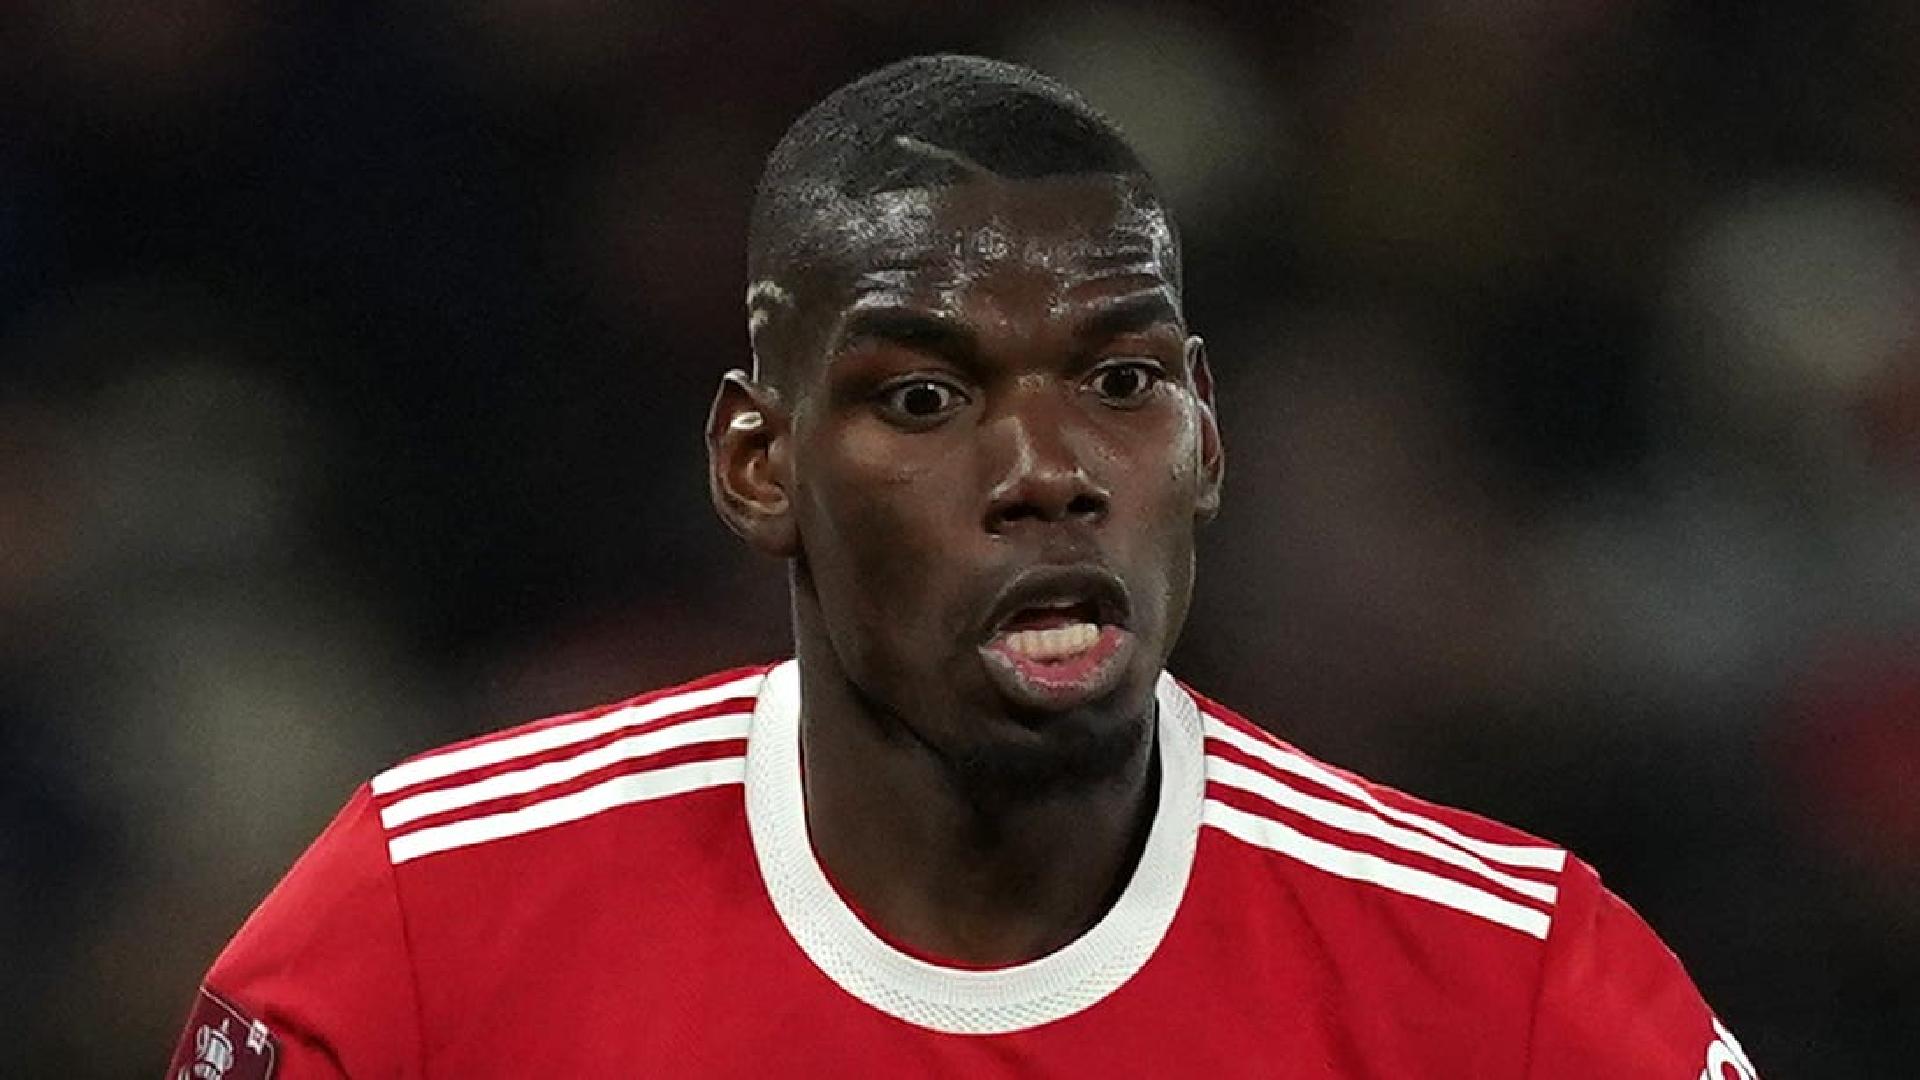 Paul Pogba ‘sad, shocked and heartbroken’ after being banned for doping